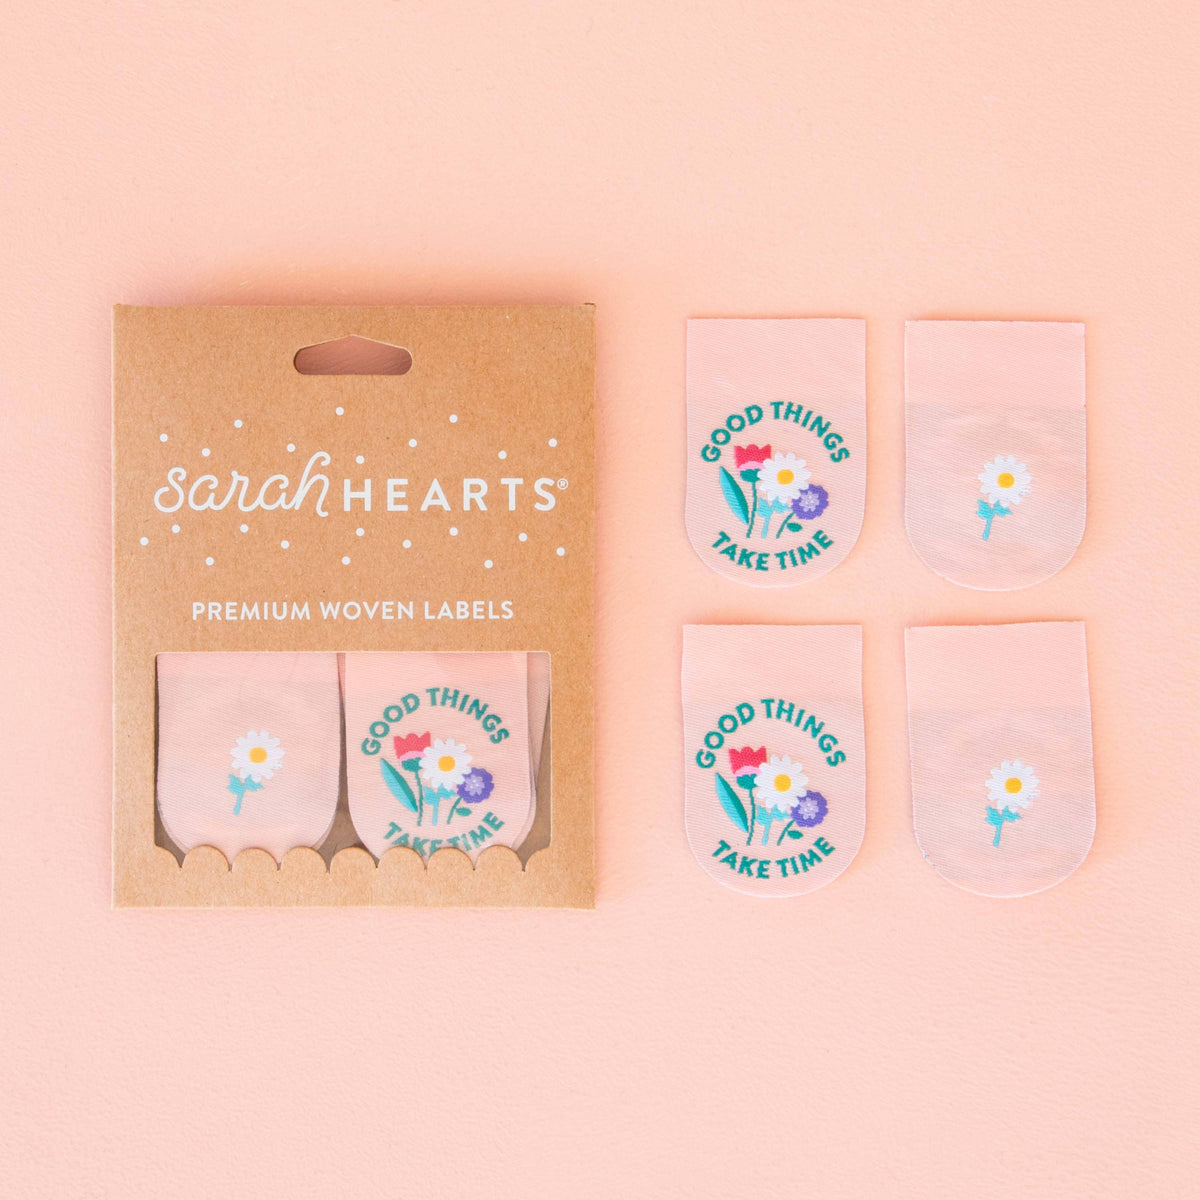 Good Things Take Time Woven Sewing Labels | Sarah Hearts